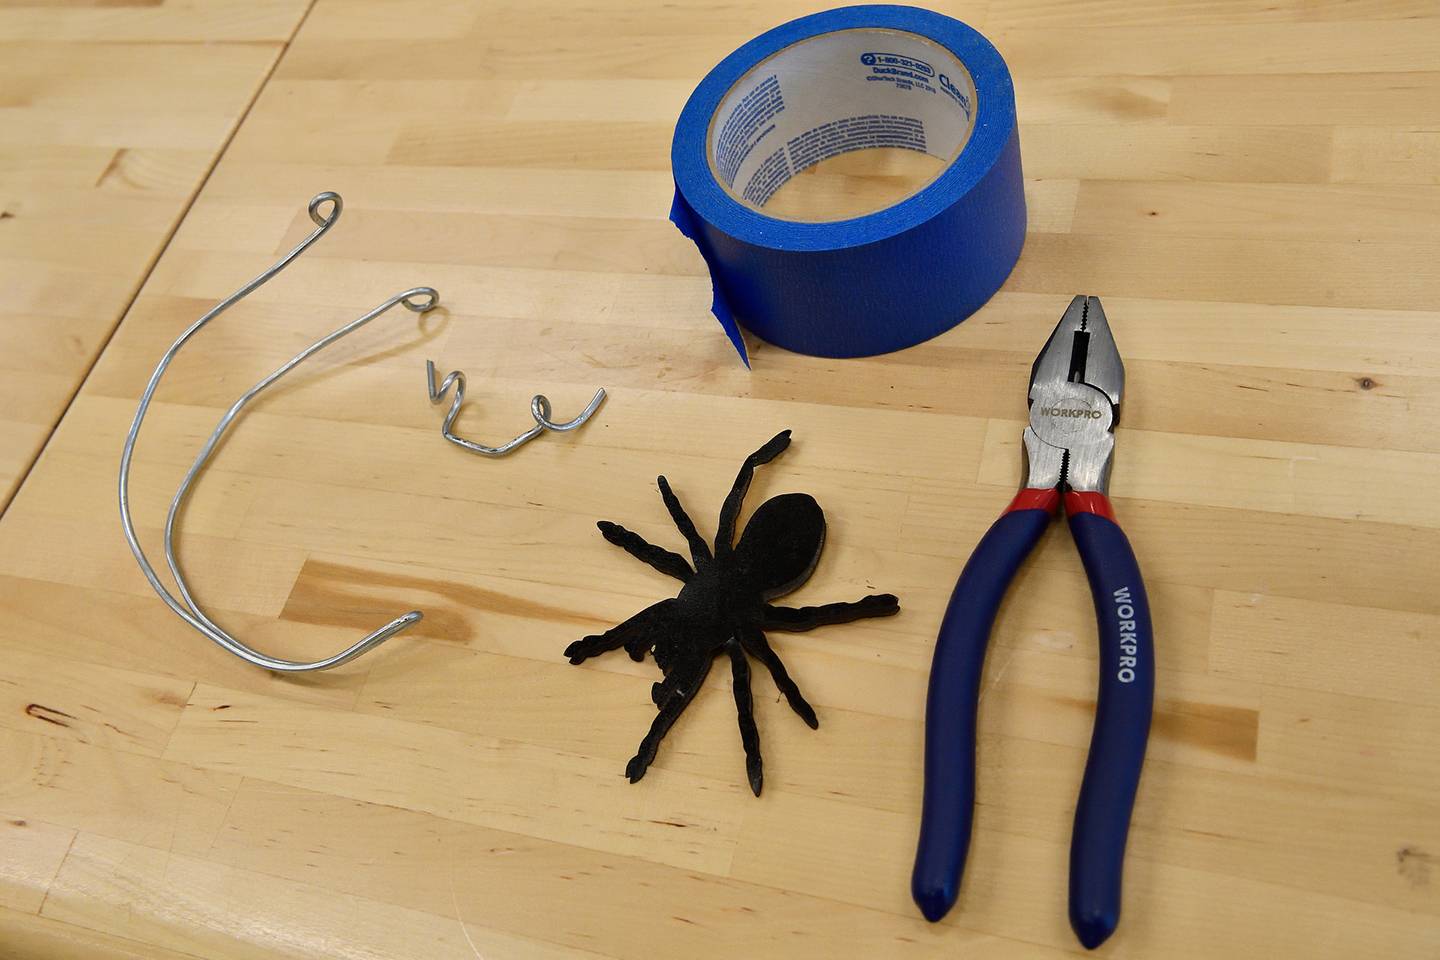 Supplies needed to create a drawer-spider prank